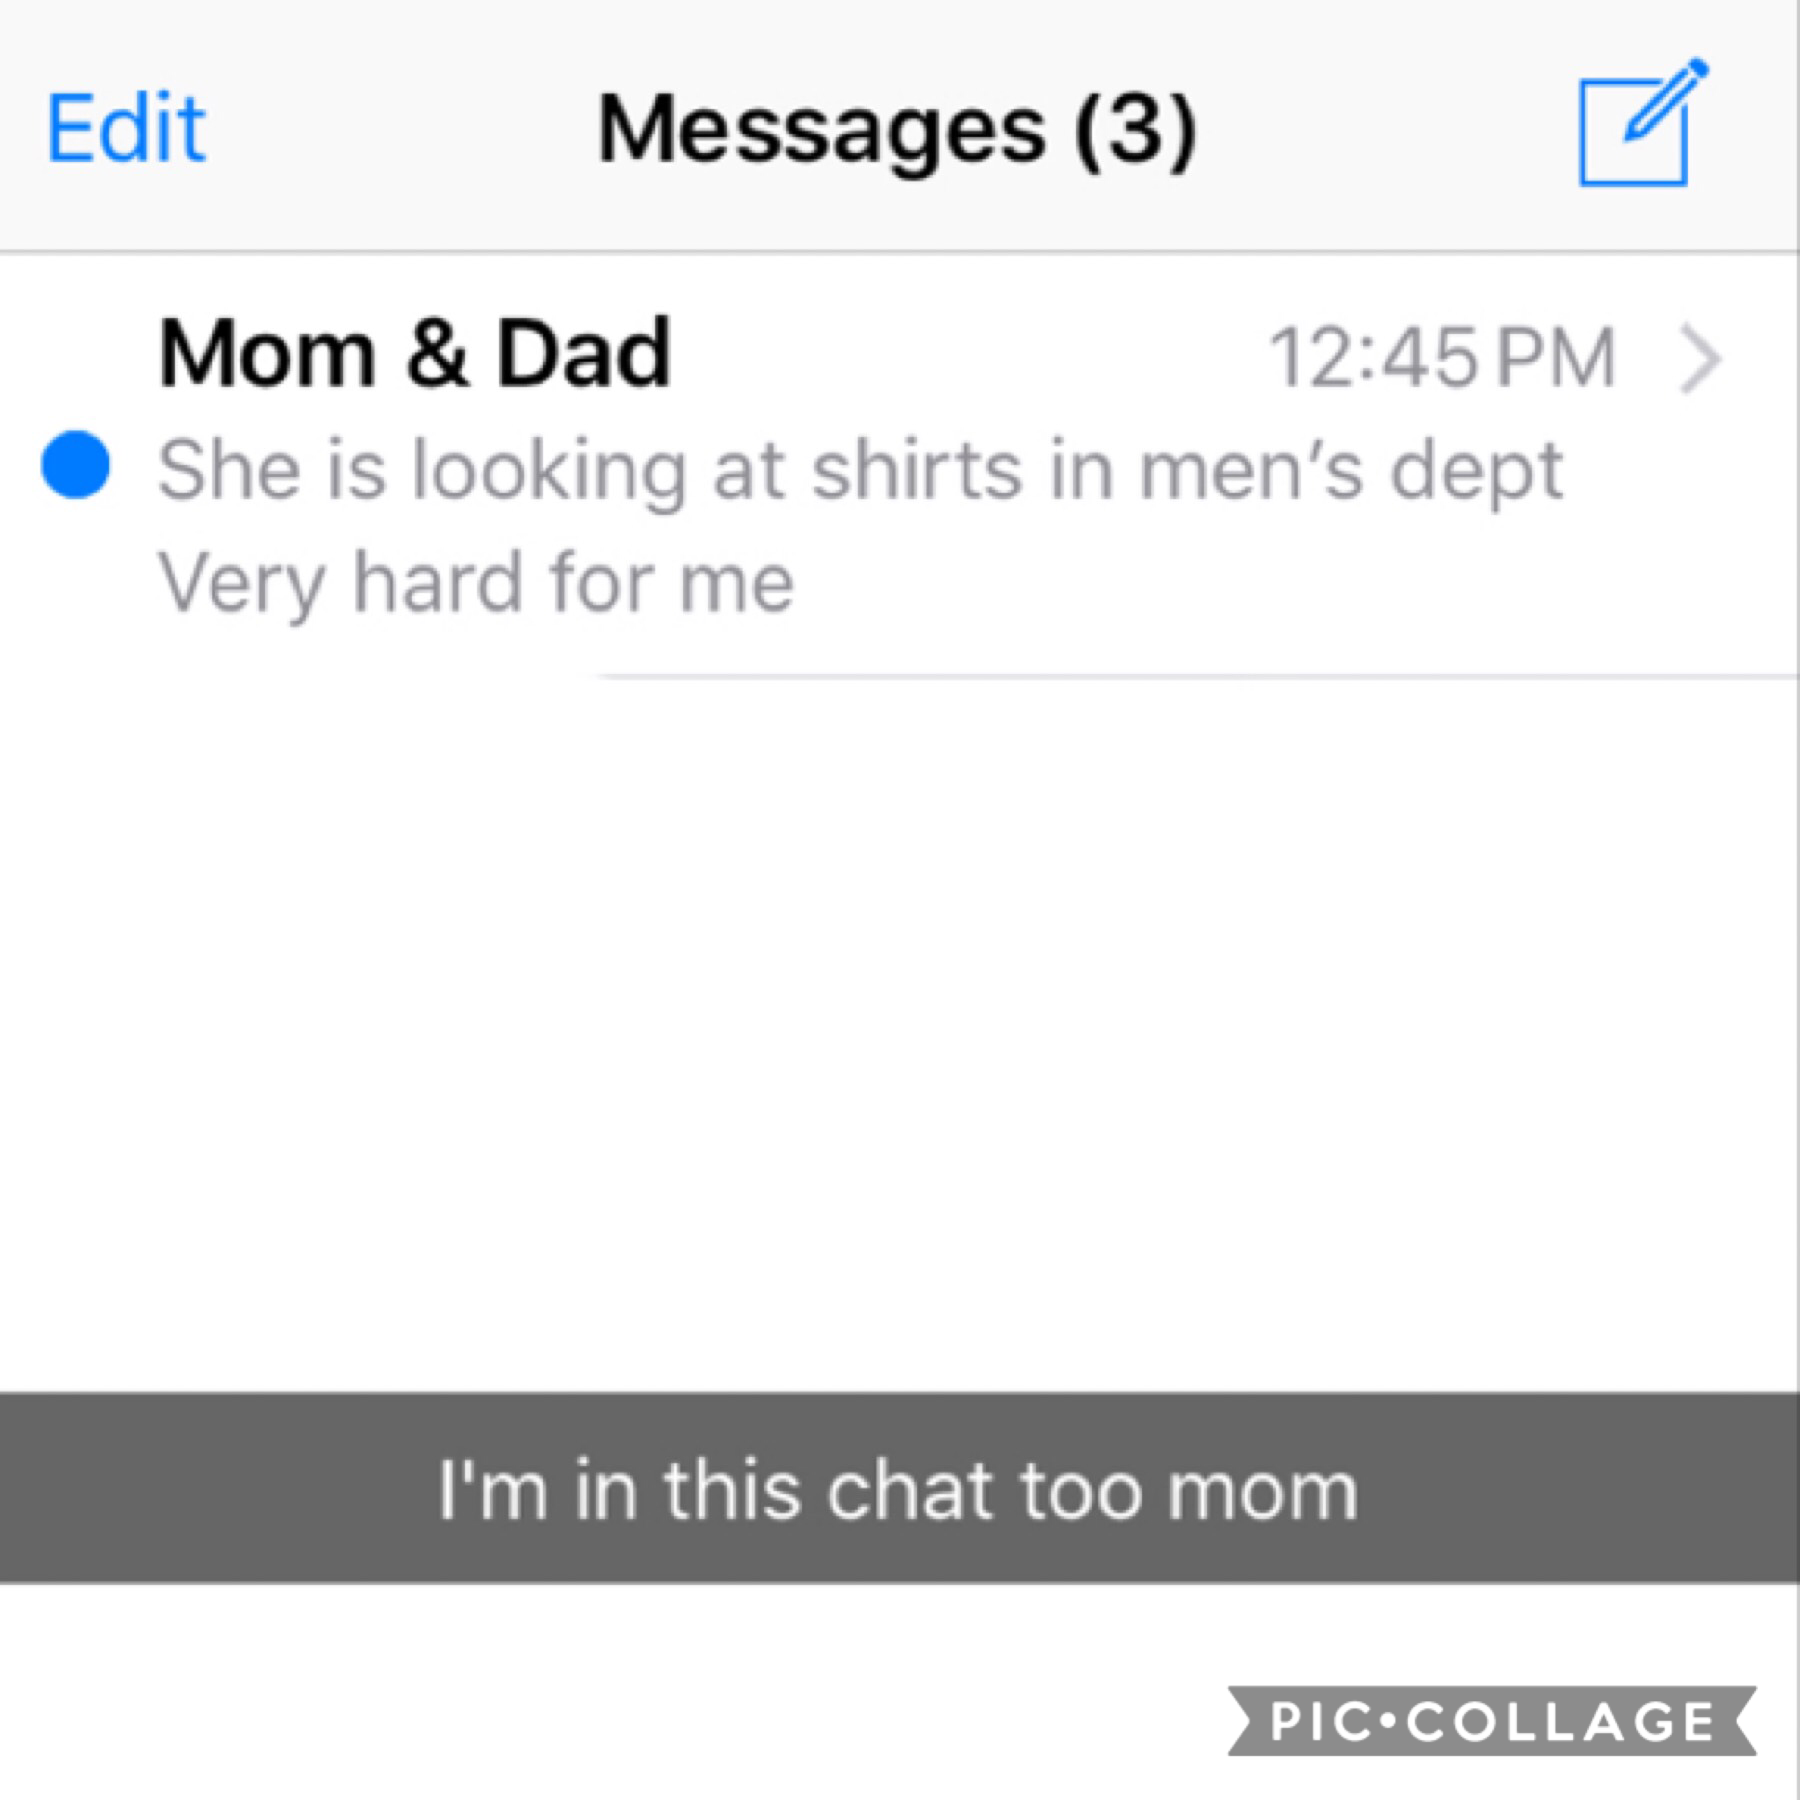 So two weeks ago I FINALLY went shopping and I got two men's shirts!! I was super happy but my mother, as seen in this text, was not